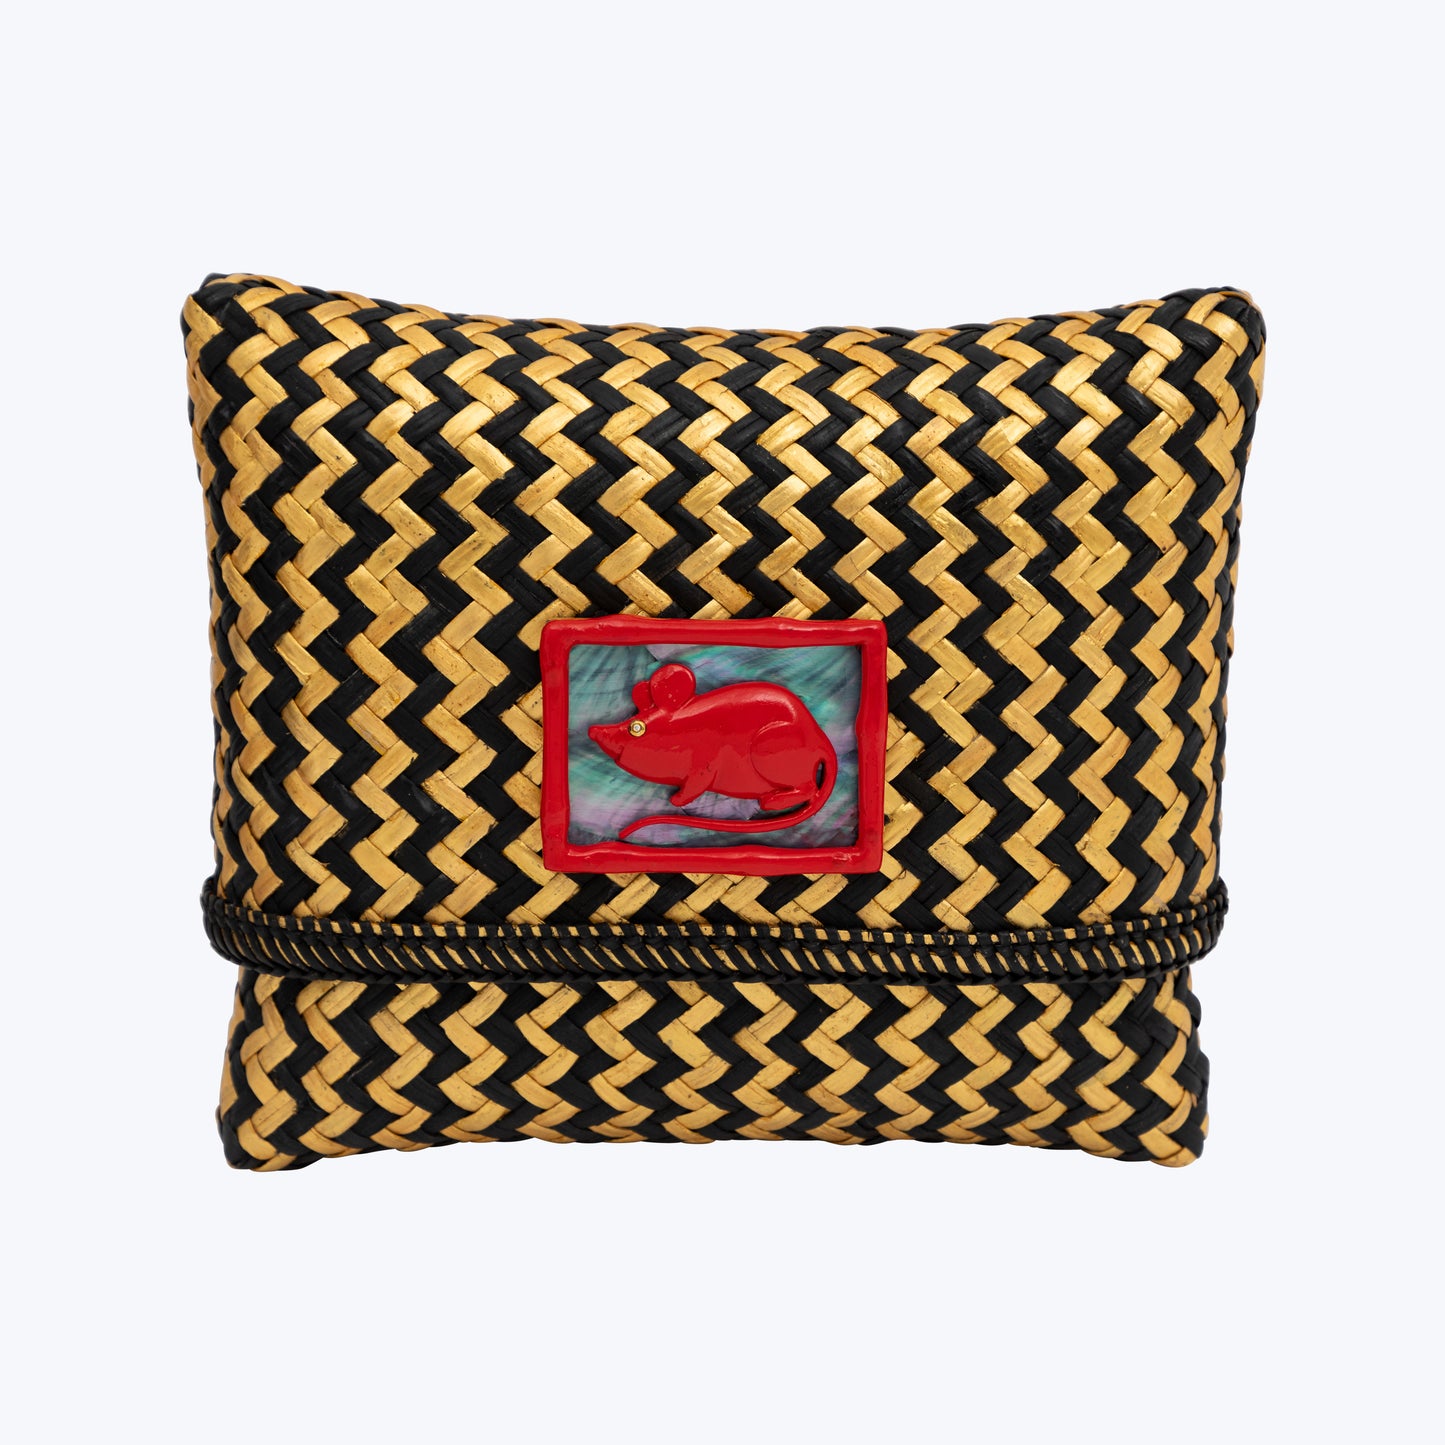 Tropical Woven Rattan Bags with Chinese Zodiac - Rat